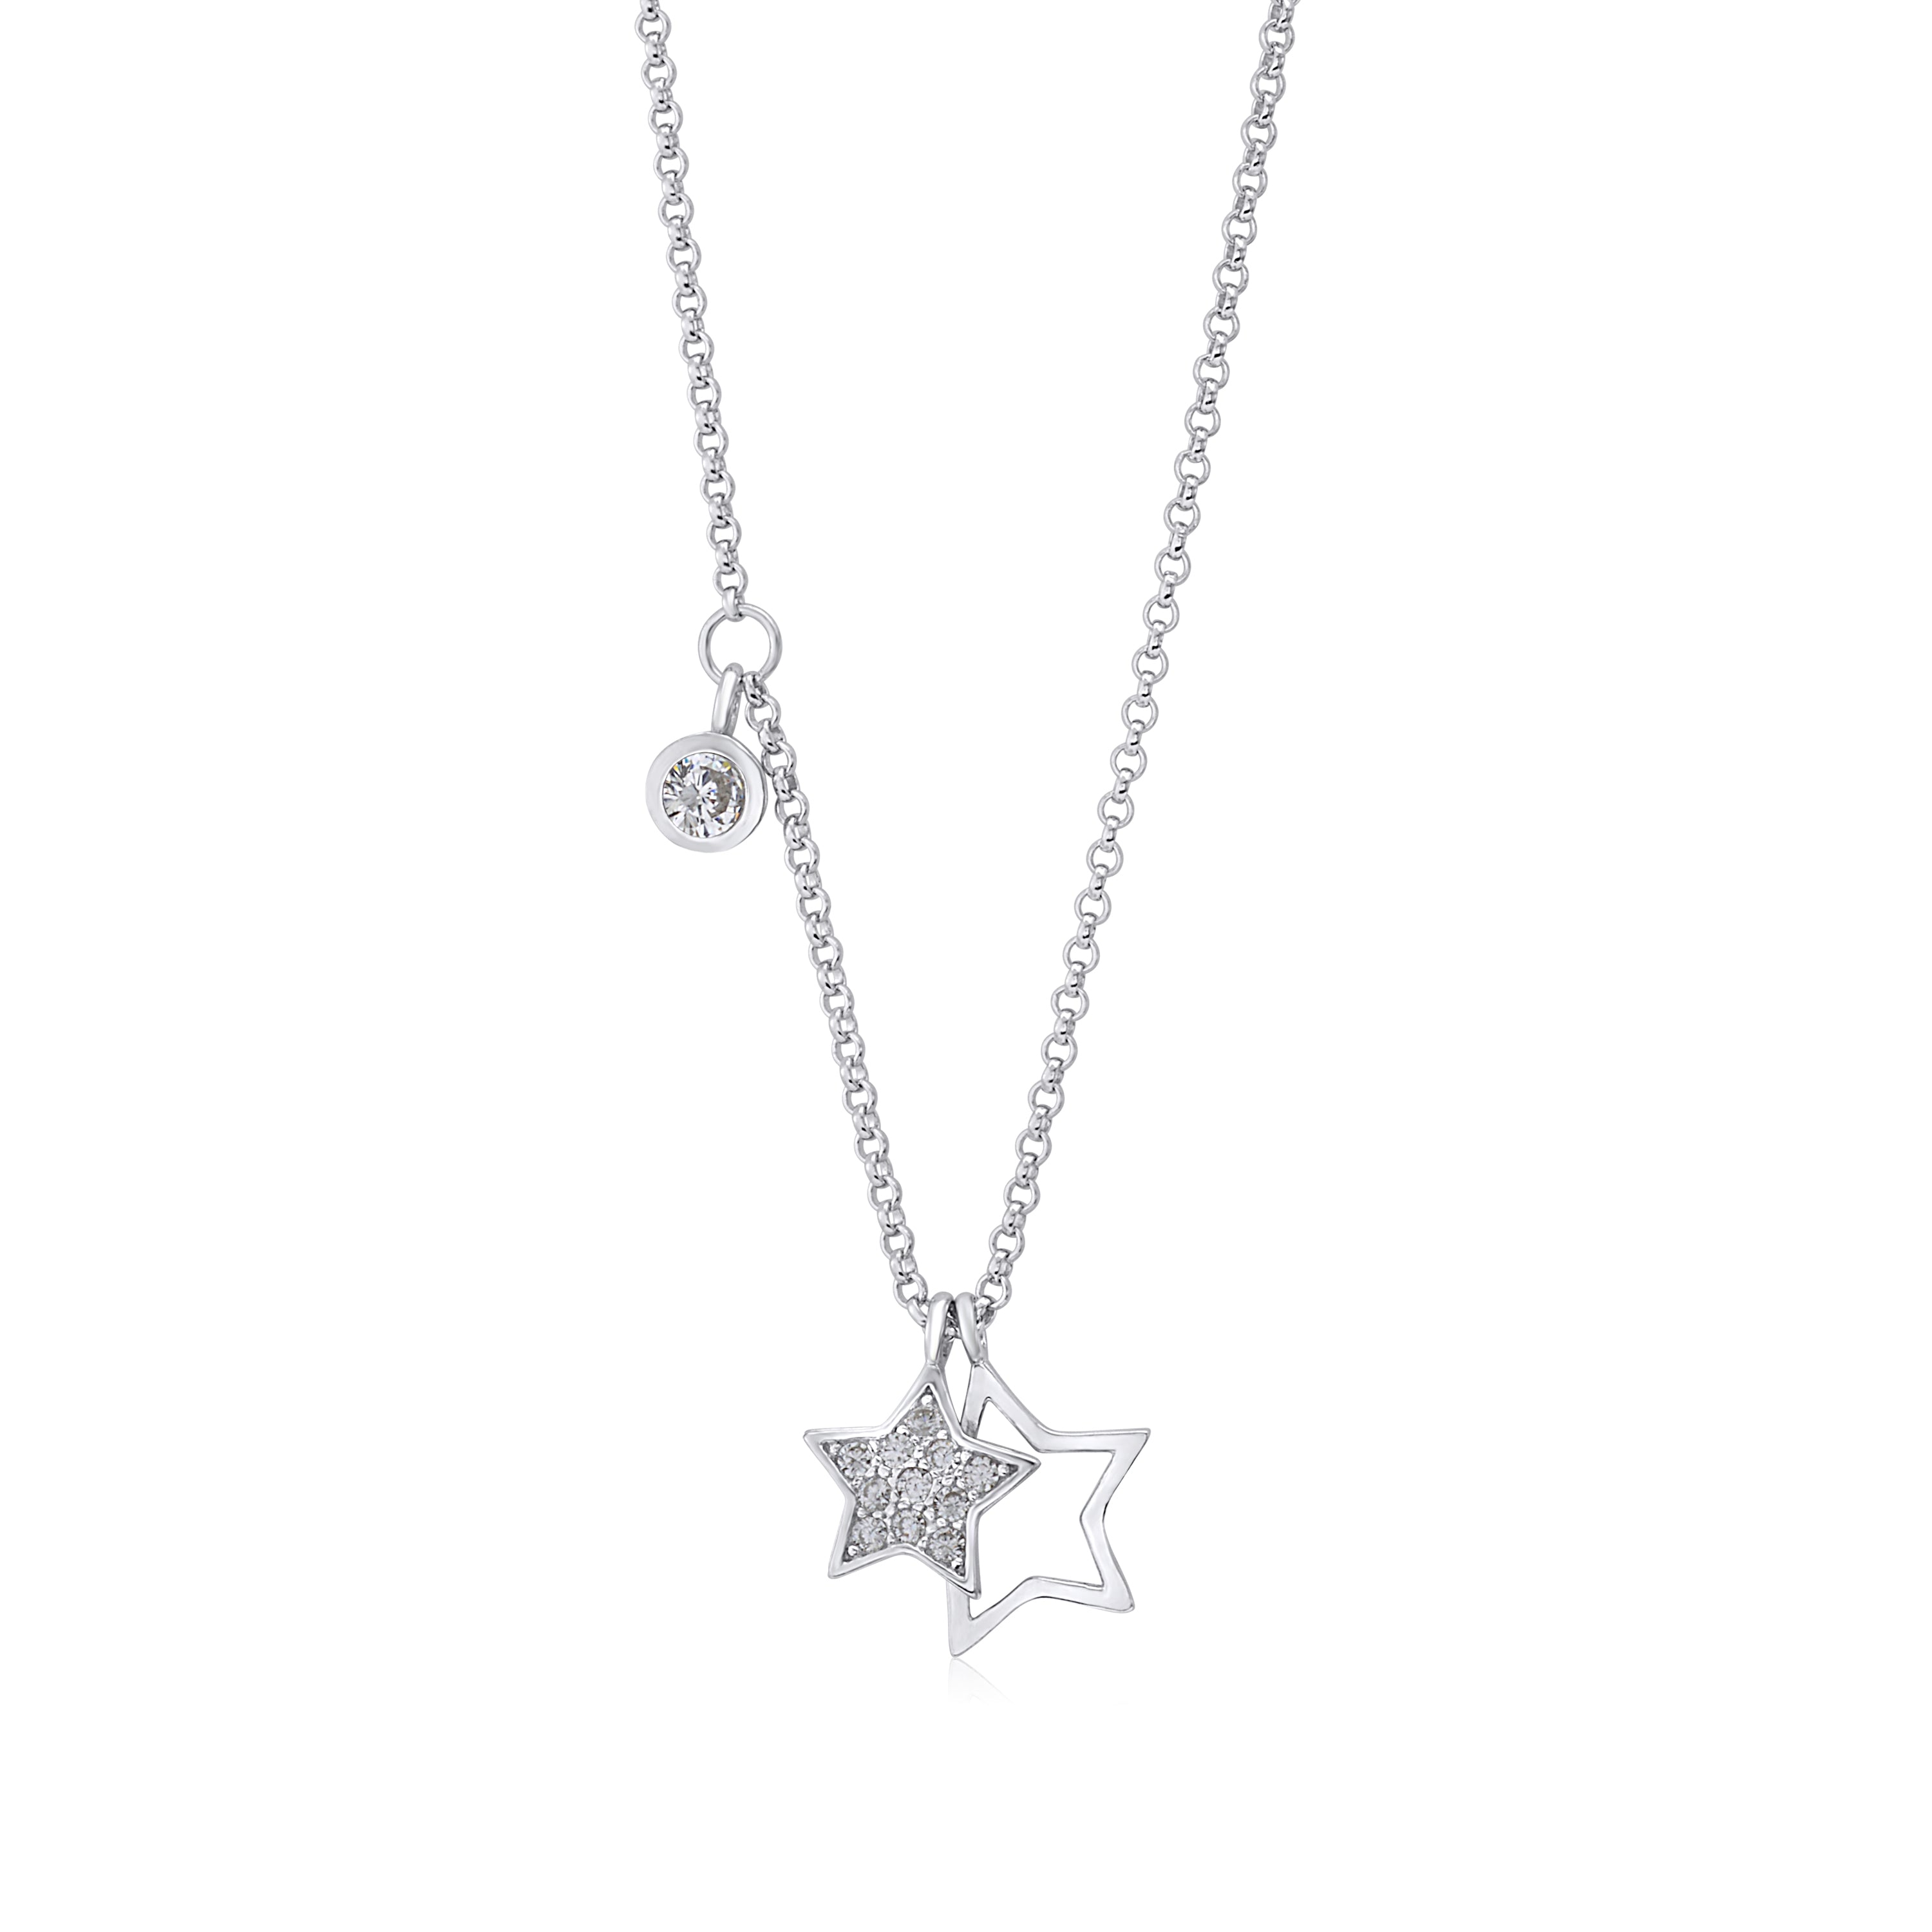 UNICORNJ Sterling Silver 925 Star Charm Pendant Necklace with Pavé Cubic Zirconia on Rolo Chain